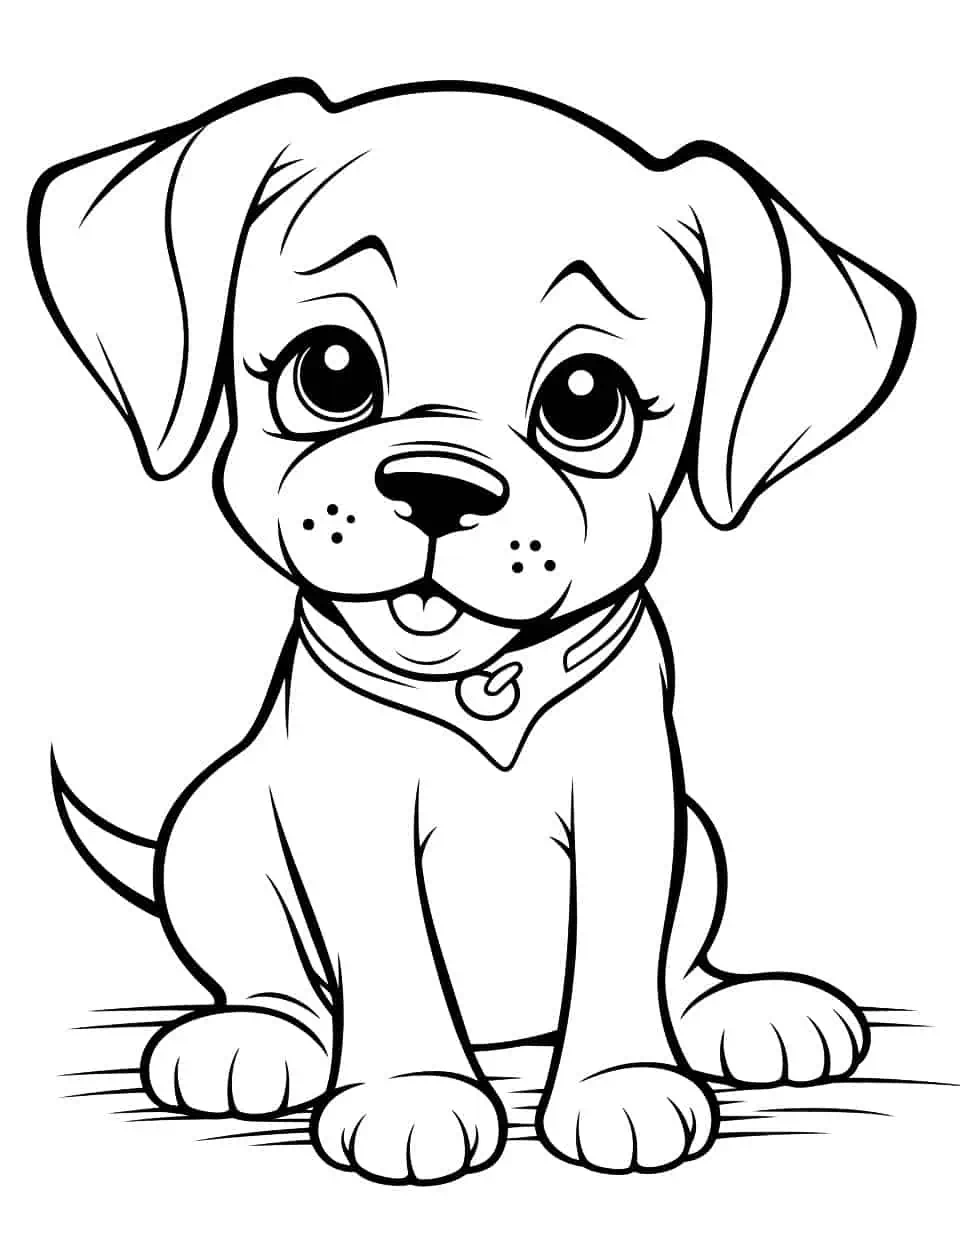 Advanced Beagle Portrait Coloring Page - An advanced coloring page featuring a realistic and detailed Beagle.